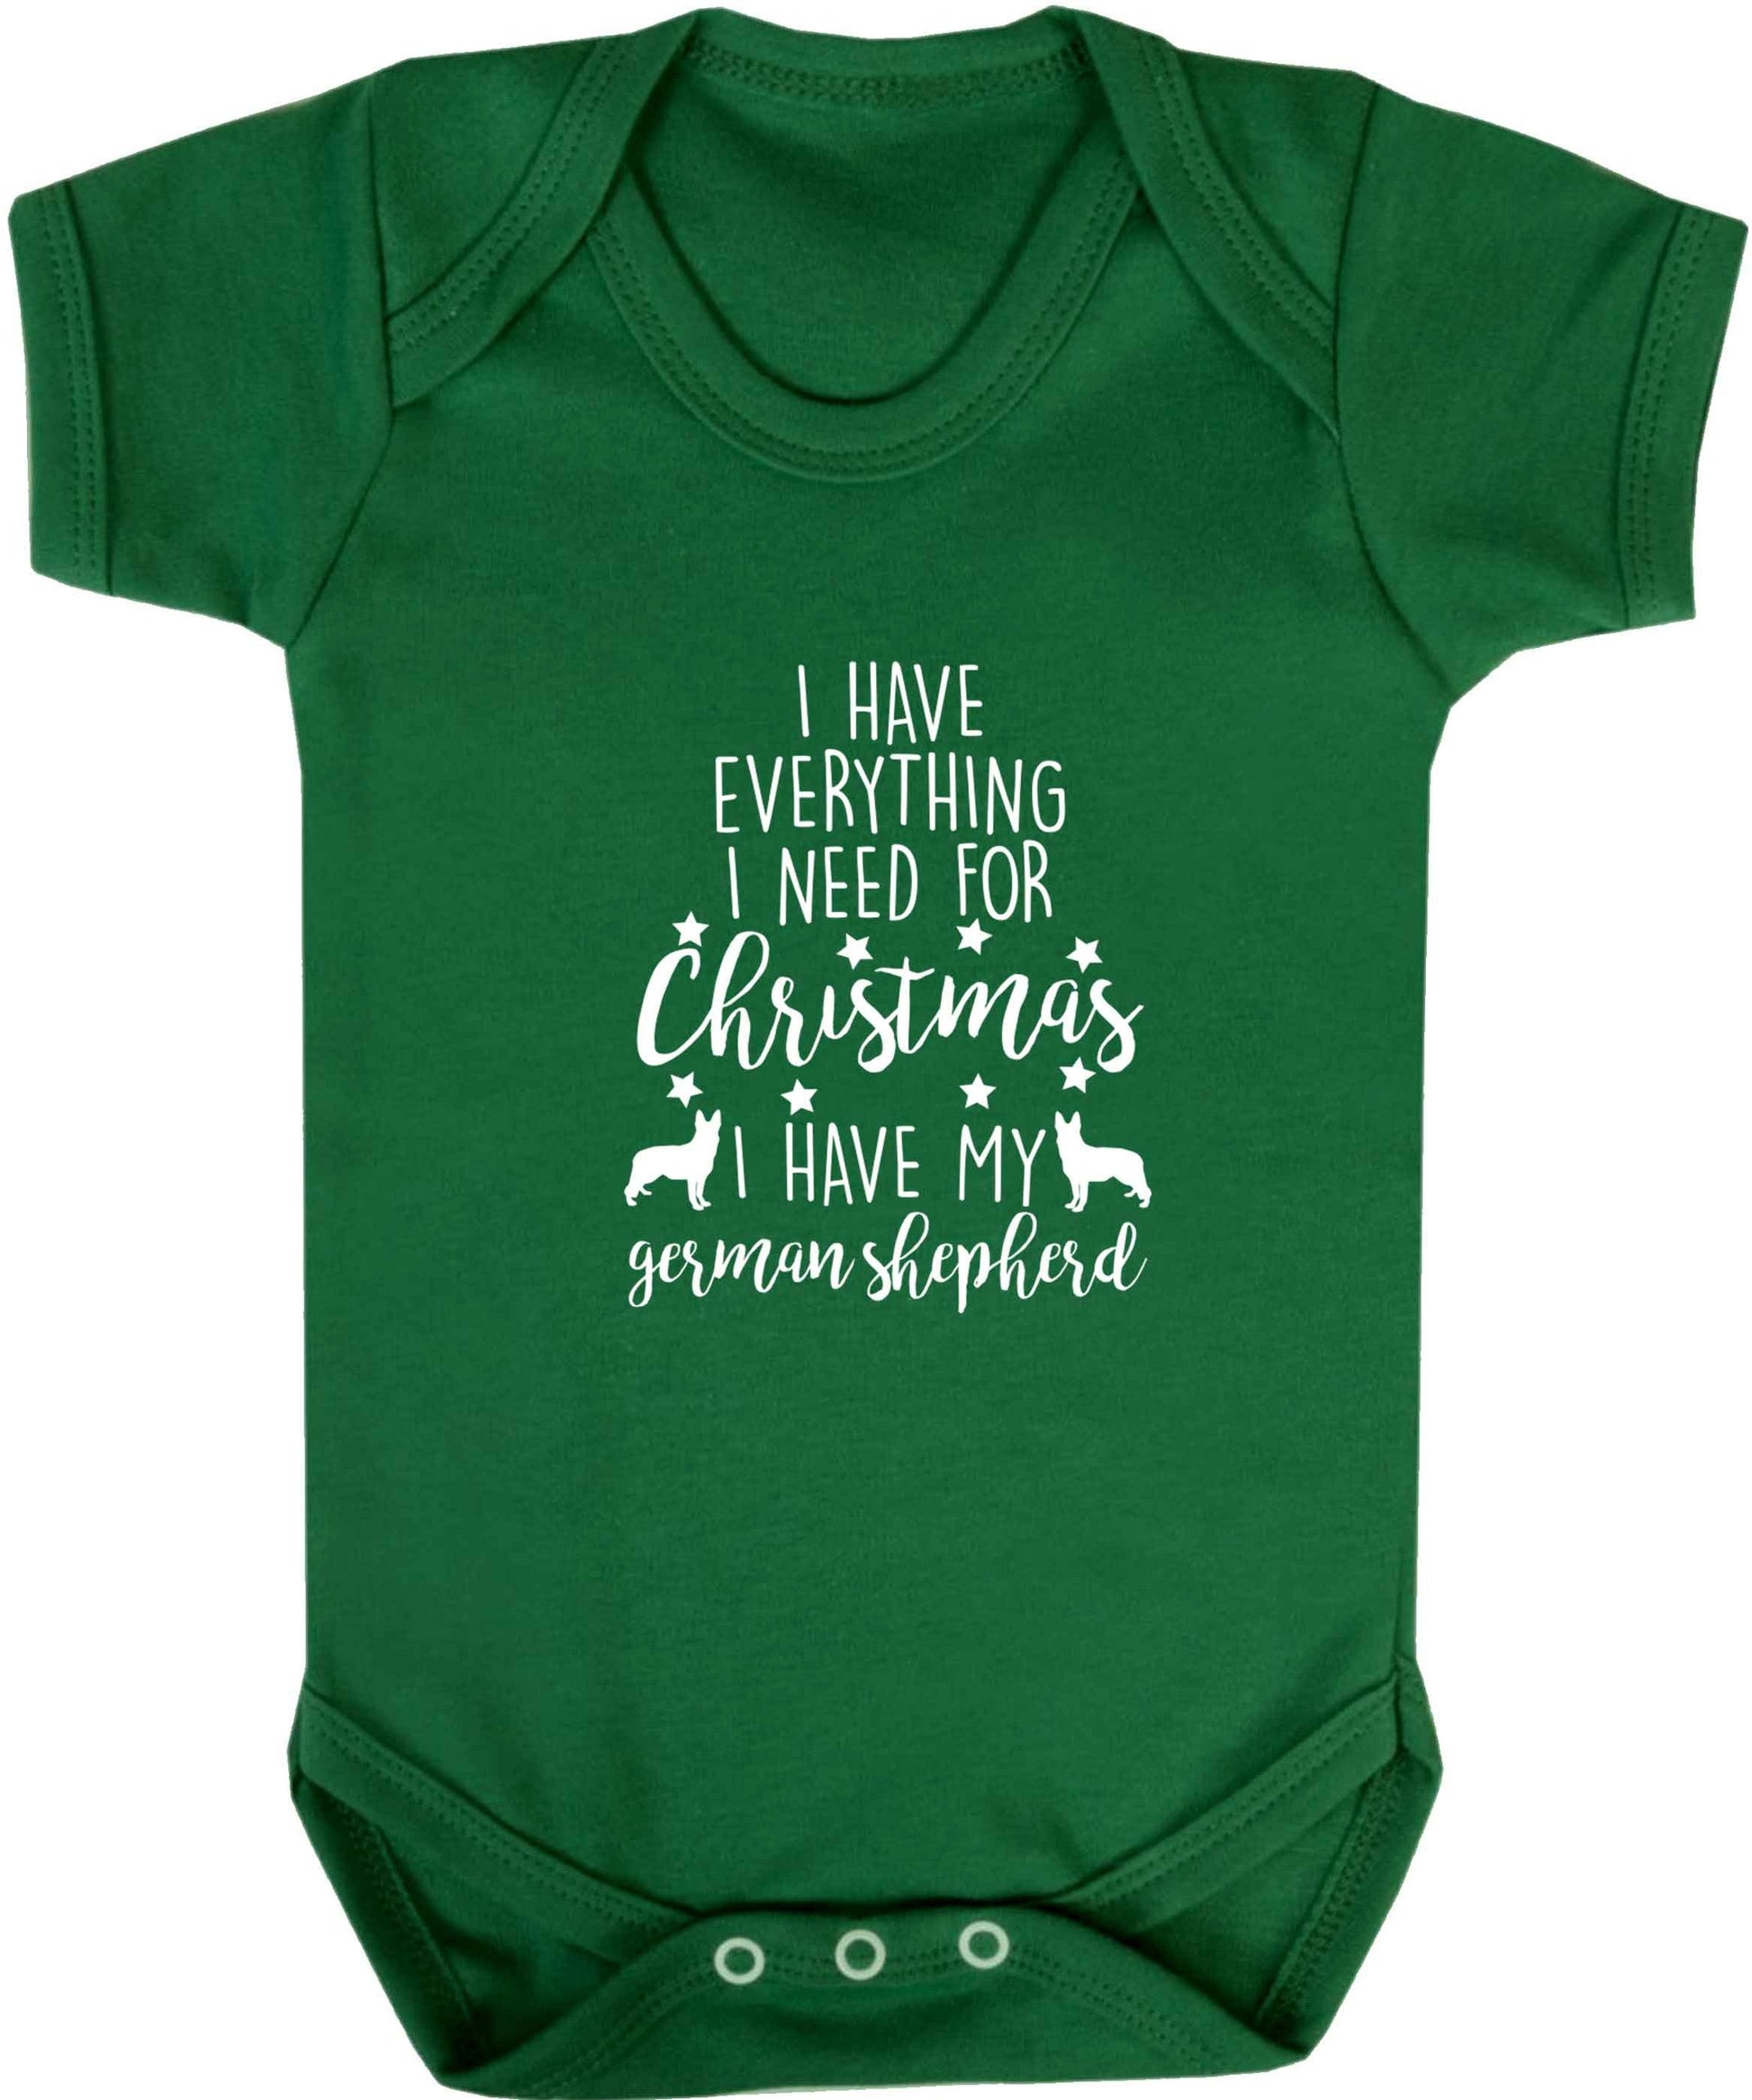 I have everything I need for Christmas I have my german shepherd baby vest green 18-24 months